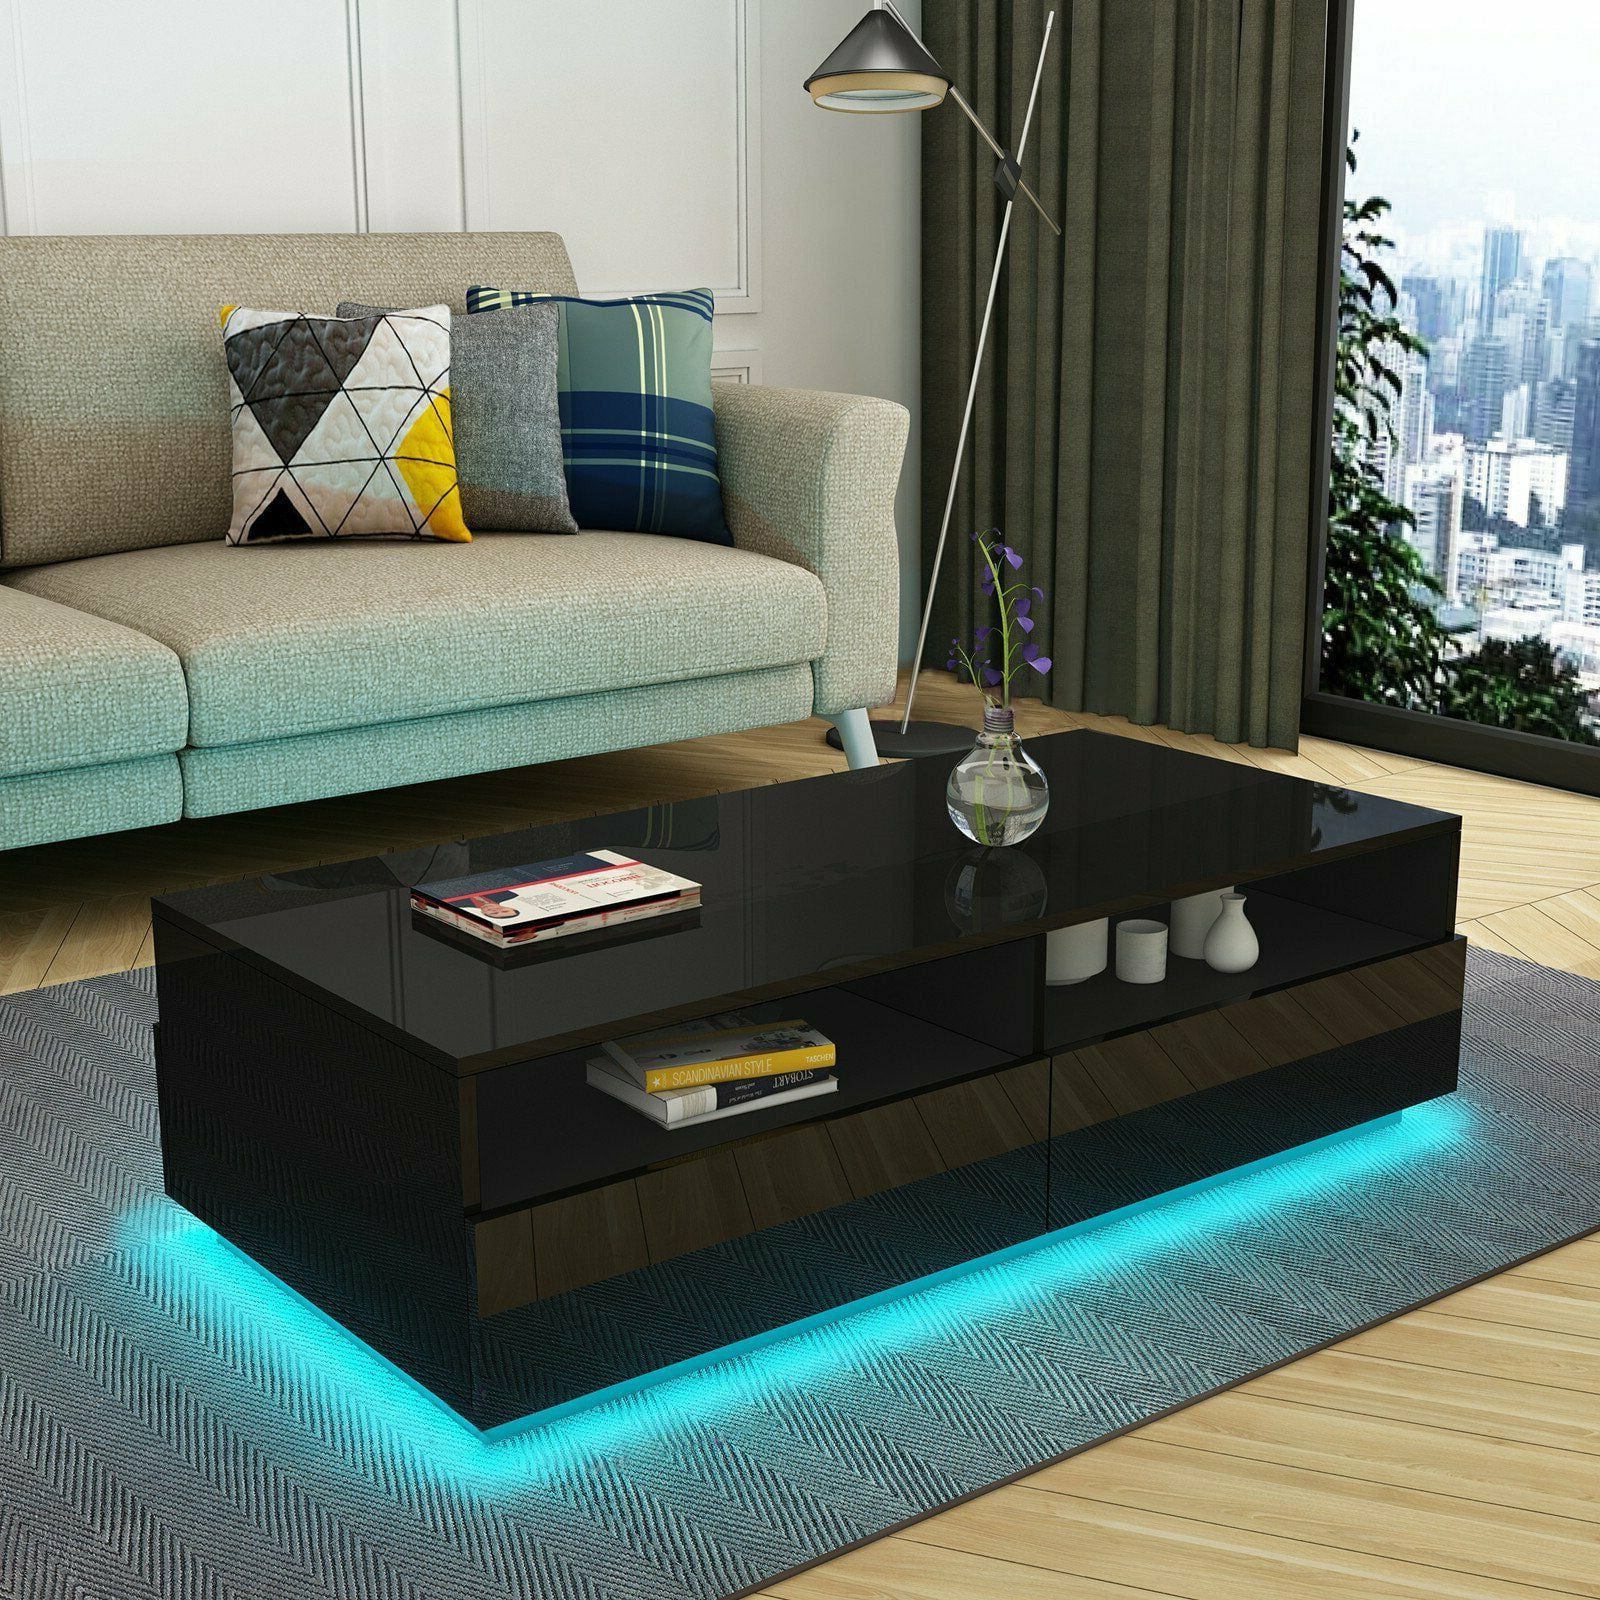 Most Recent Led Rectangular Coffee Table Tea Modern Living Room Furniture Black In Coffee Tables With Led Lights (View 9 of 15)